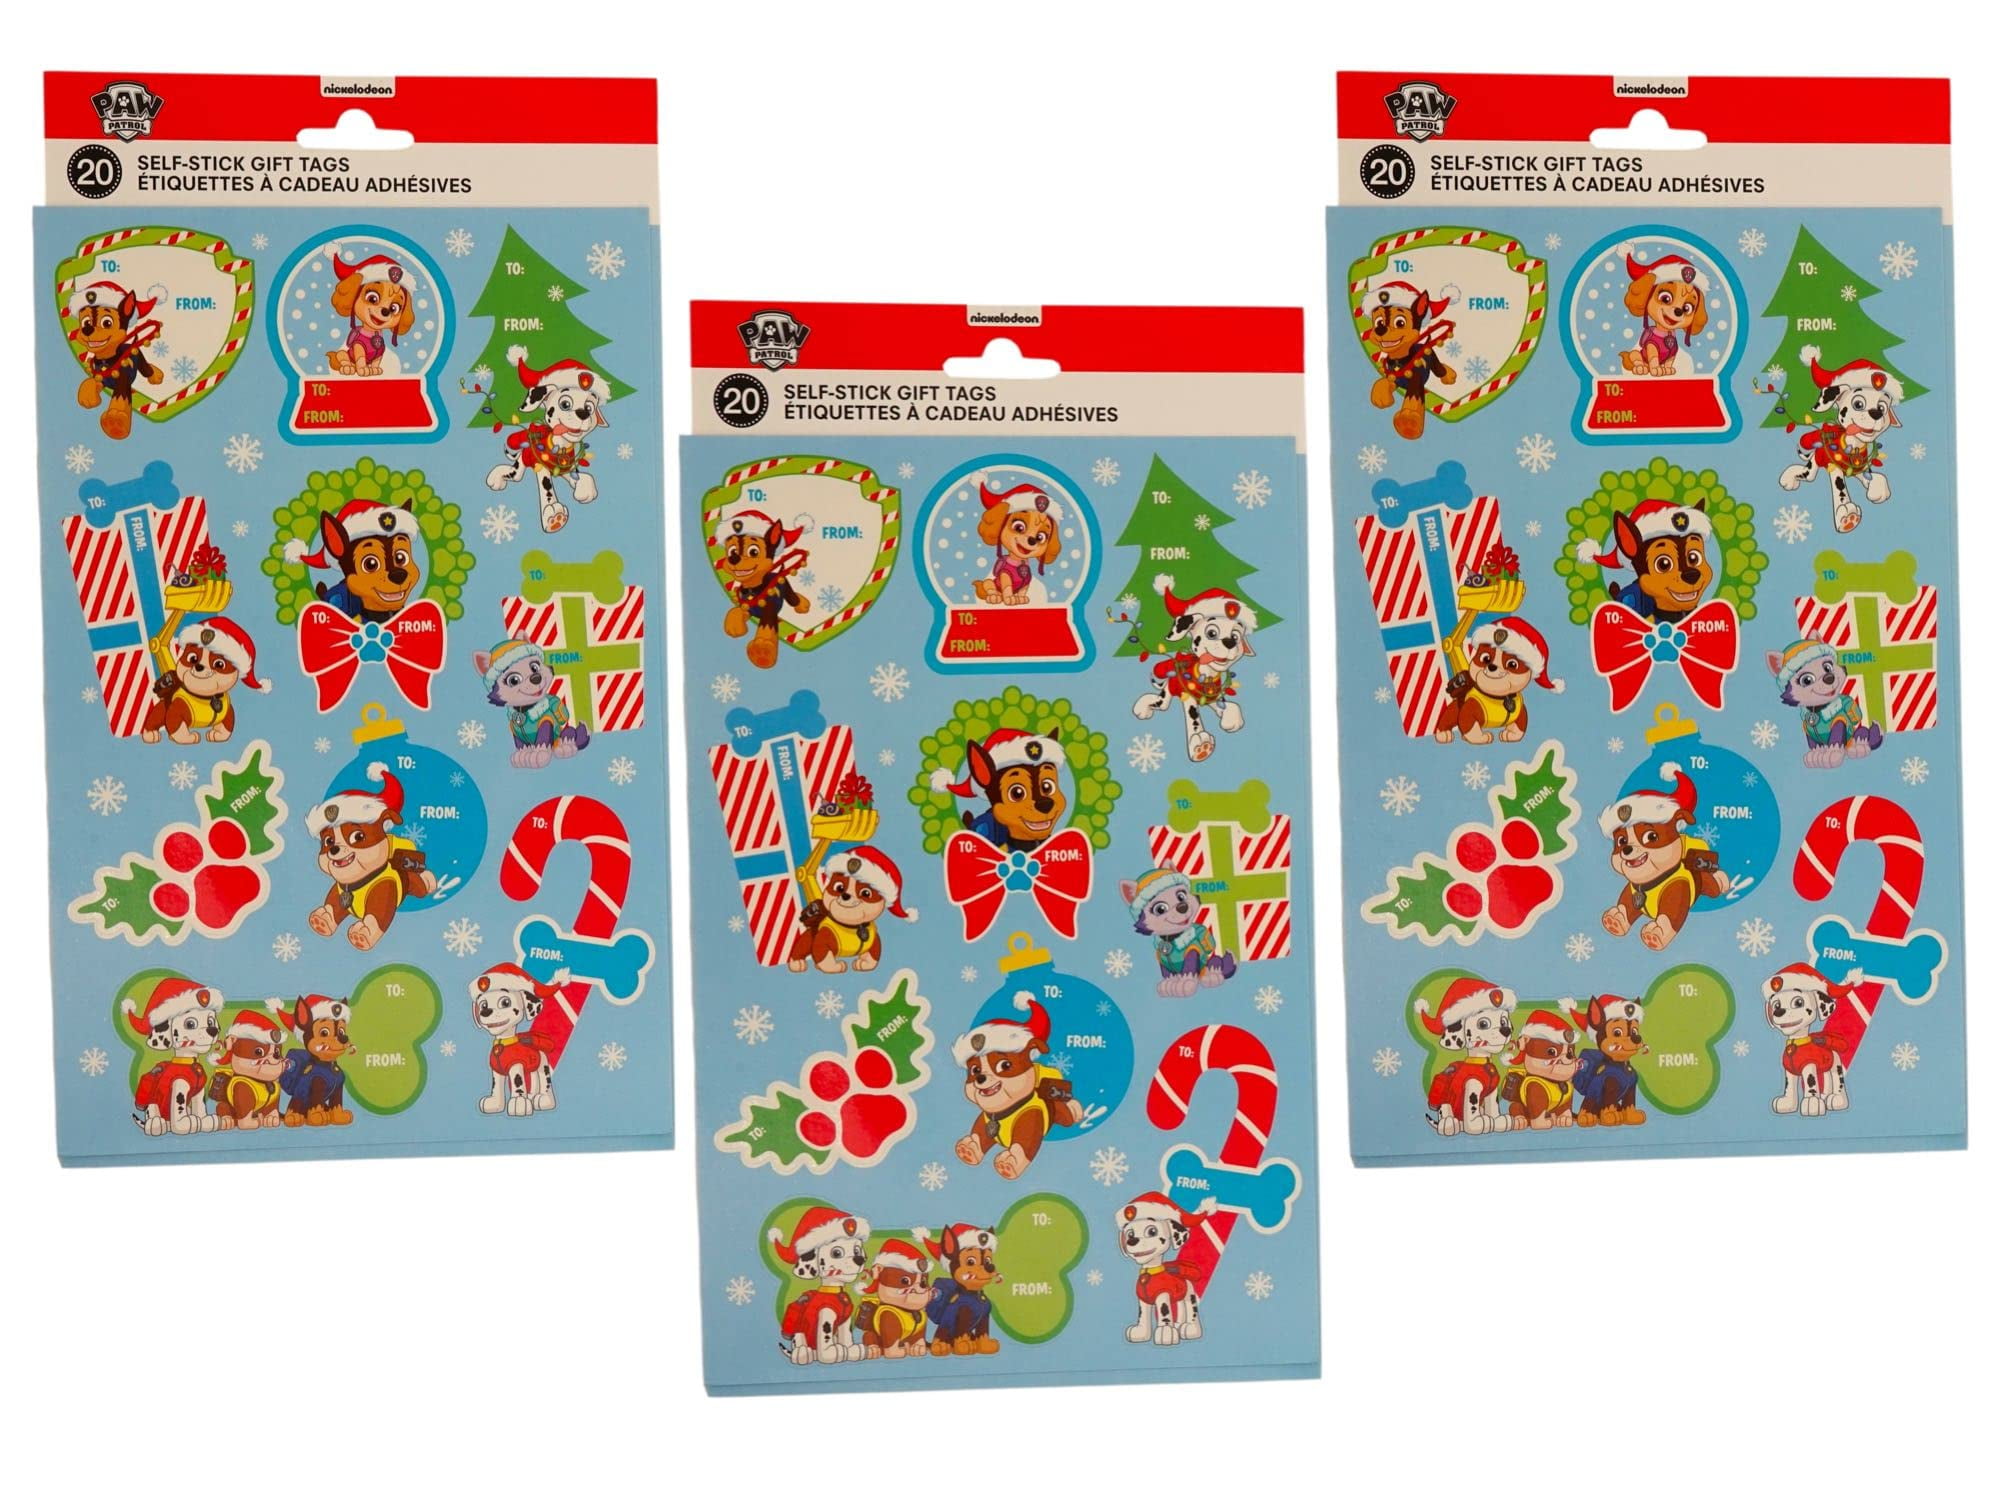 Fabel Omtrek Imperial Paw Patrol Self Stick Gift tags (20 ct x 3, 60 total) Adhesive Christmas  Holiday Gift Tags - Walmart.com